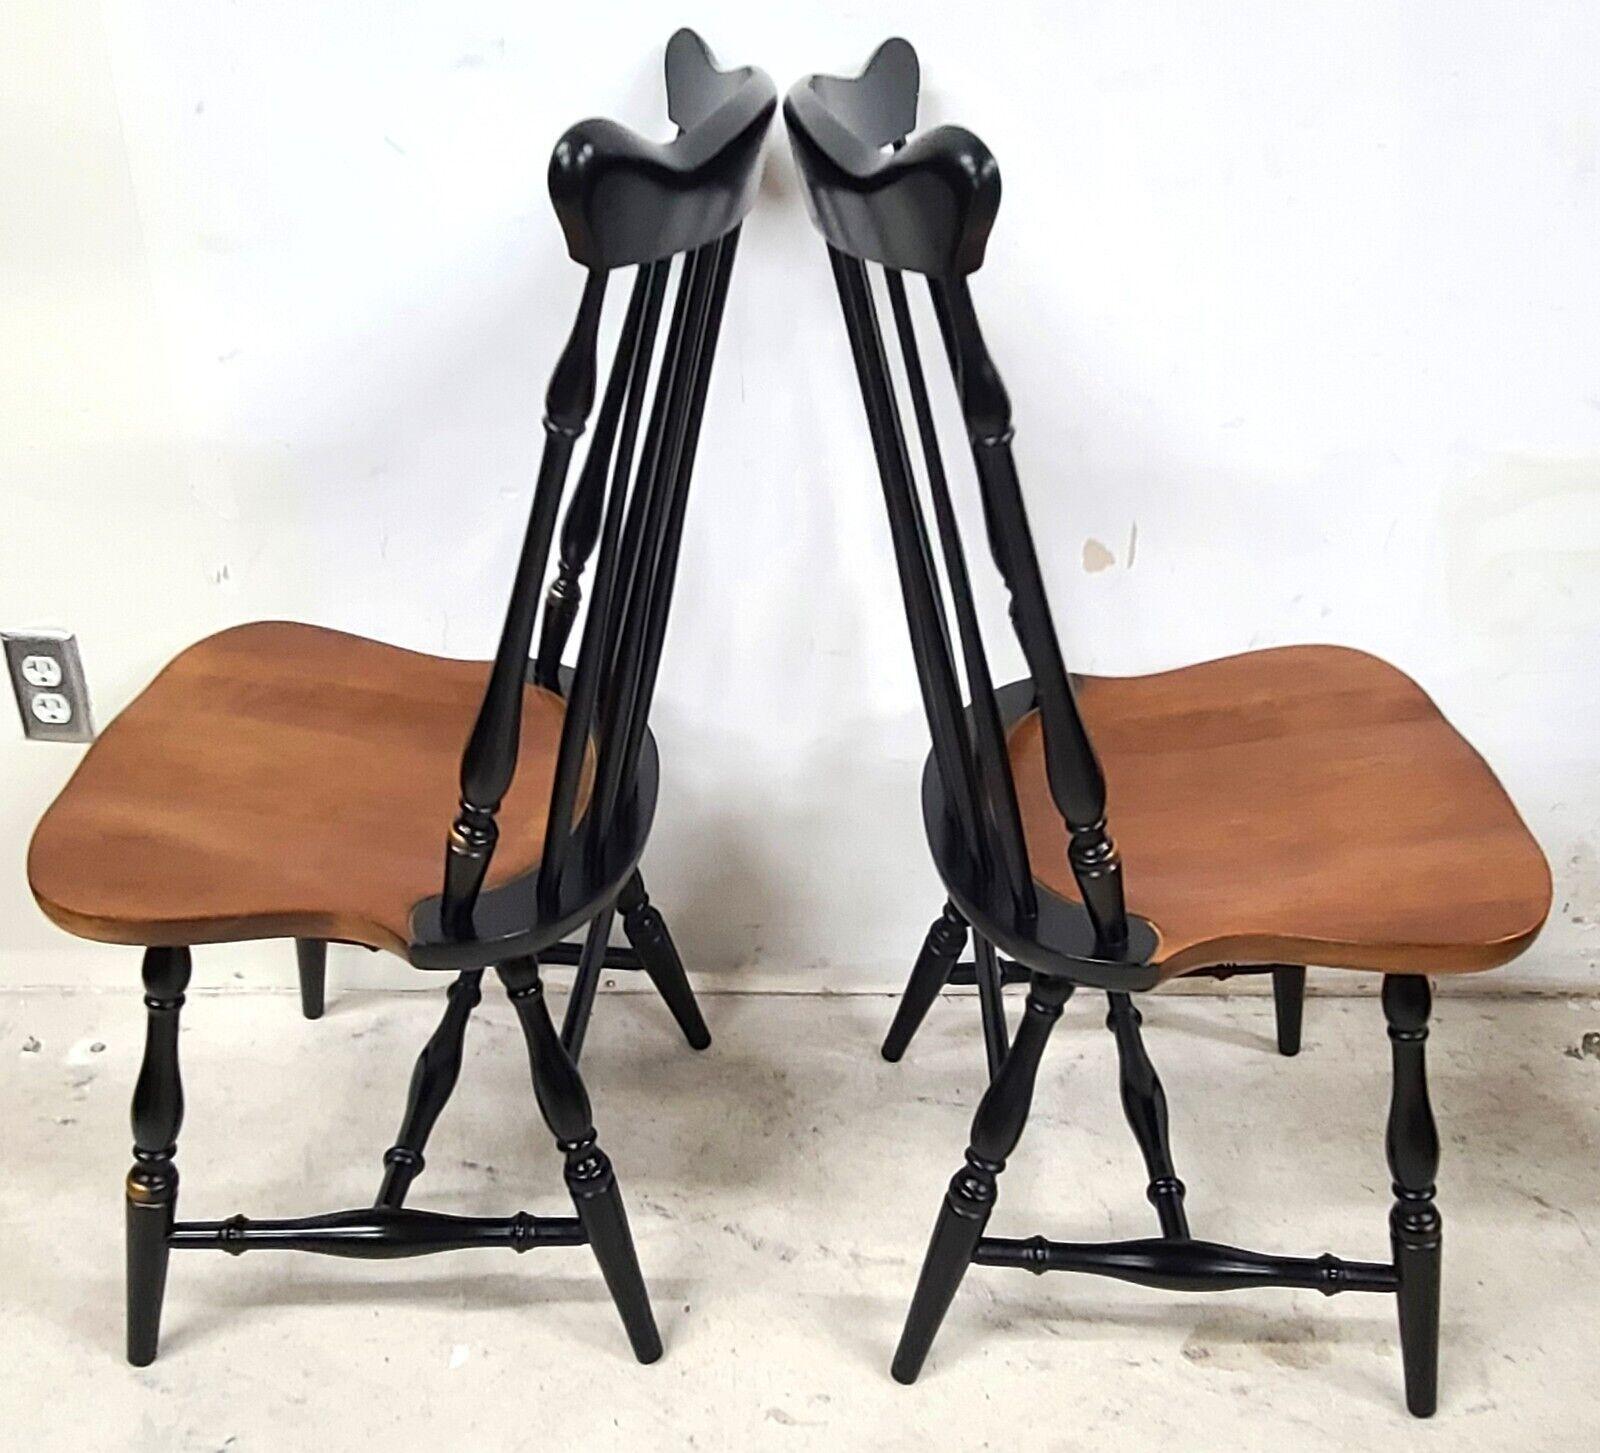 Offering One Of Our Recent Palm Beach Estate Fine Furniture Acquisitions Of A
Set of 4 Vintage L Hitchcock Harvest Windsor Maple Dining Chairs 

Approximate Measurements in Inches
36